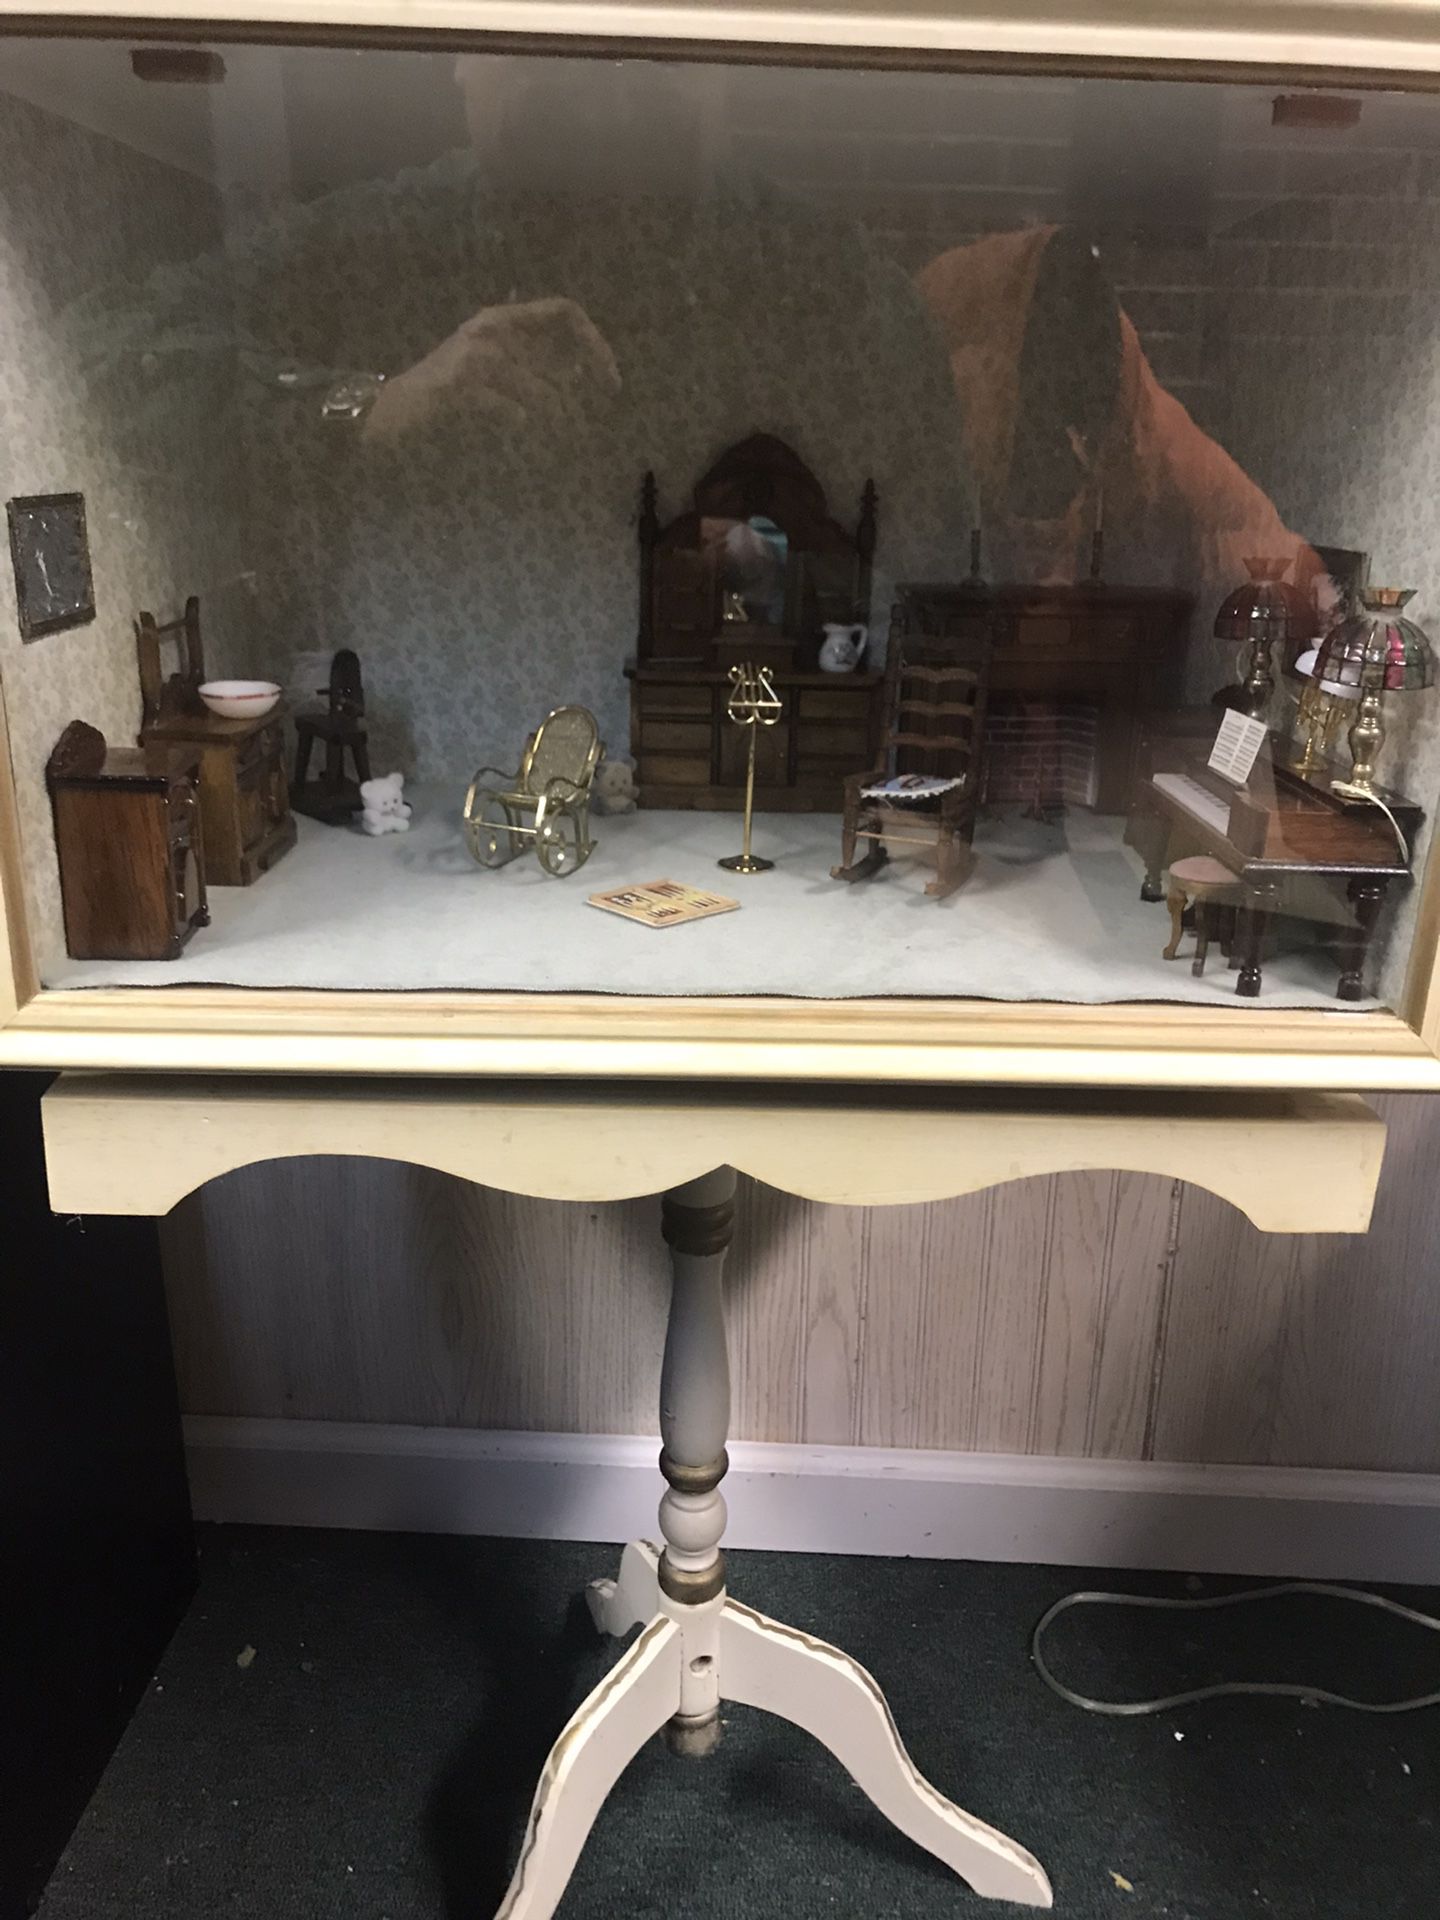 Doll House Display Room Case